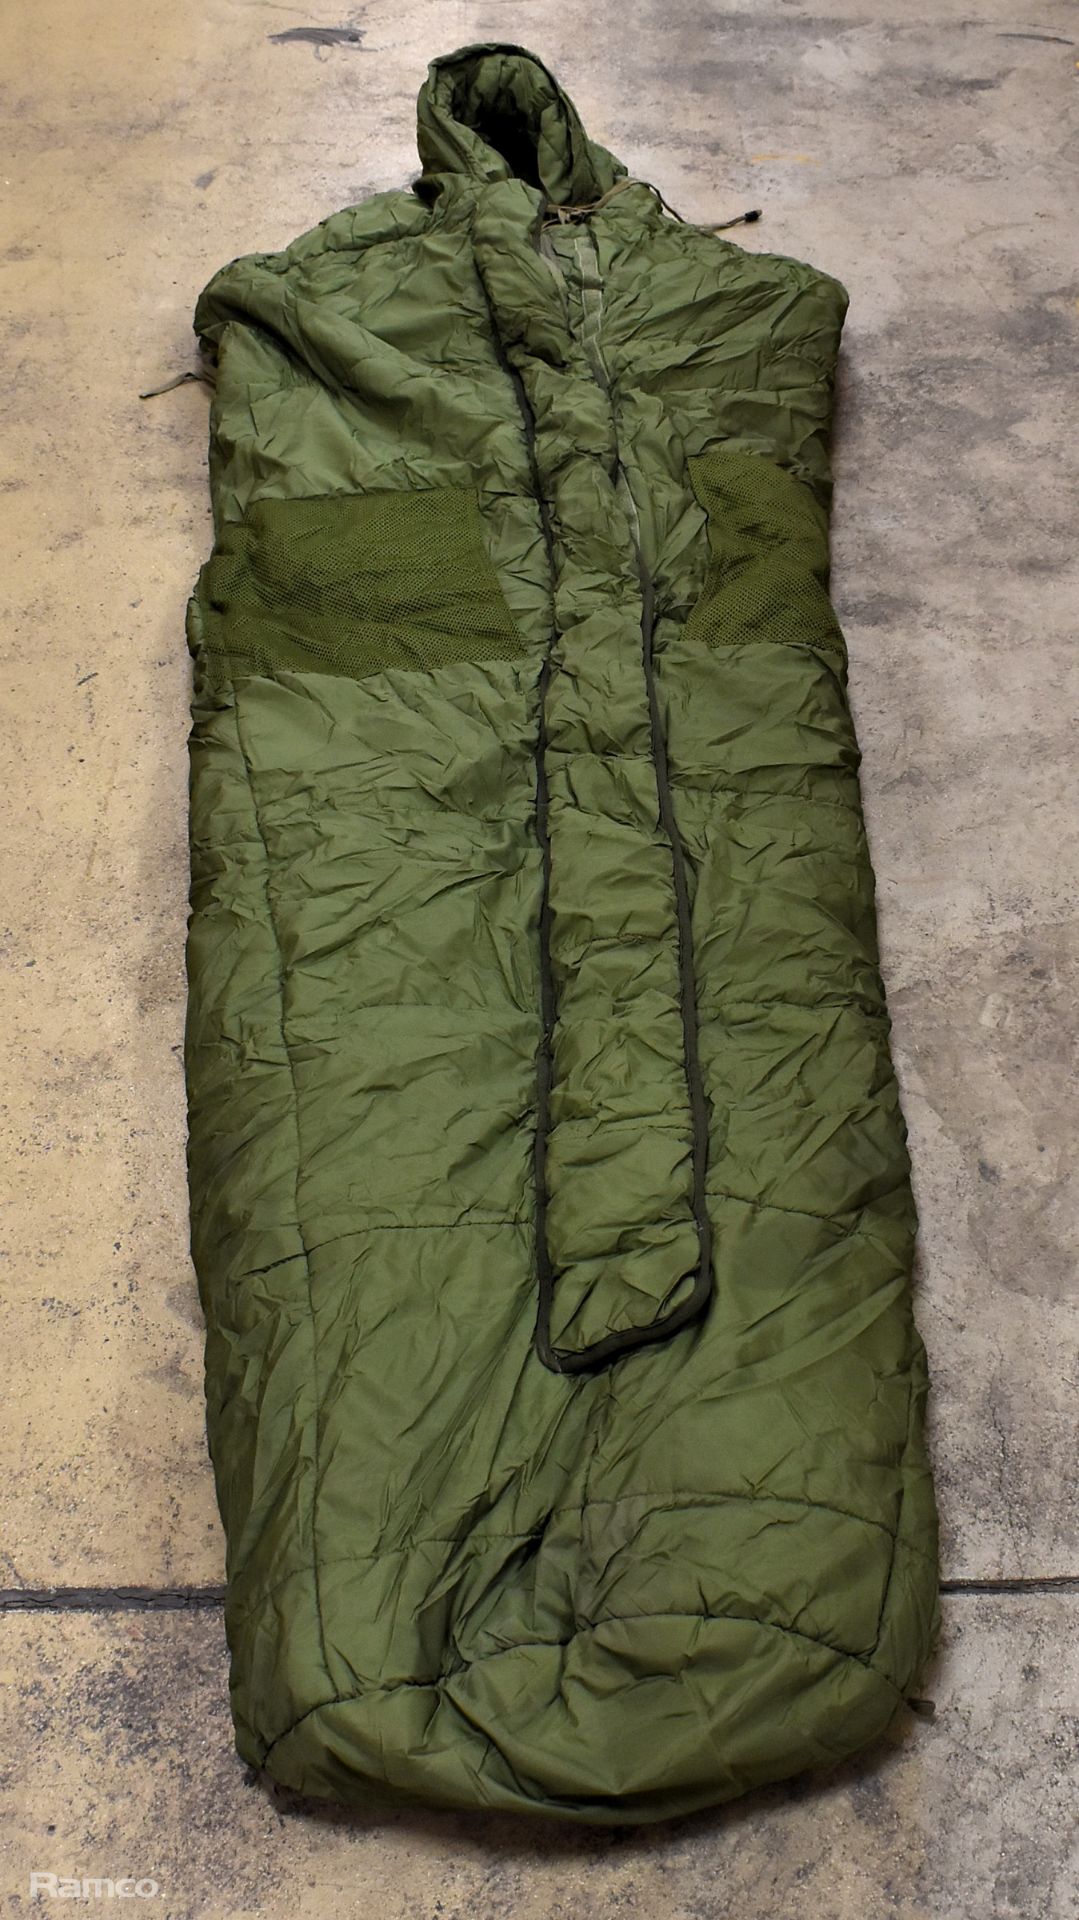 31x Sleeping bags - mixed grades and sizes - Image 2 of 8